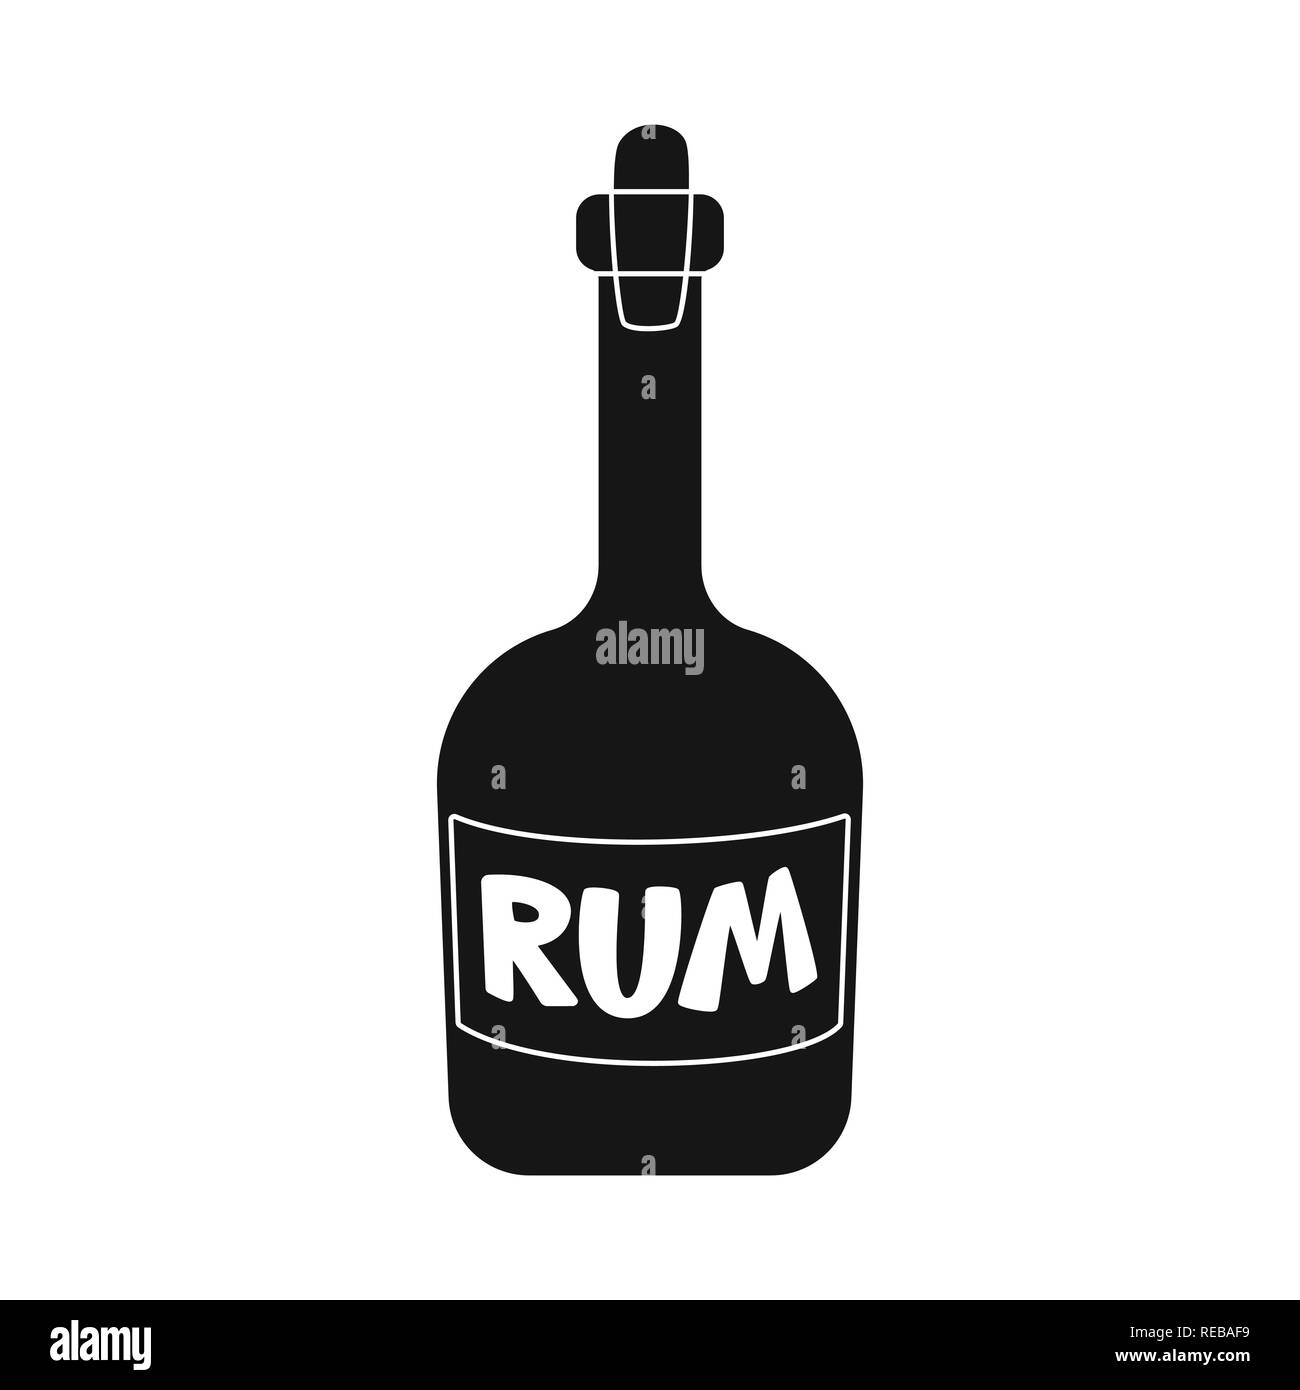 rum,bottle,alcohol,glass,bung,pirate,drink,vintag,capacity,bar,sugarcane,cane,sugar,field,plant,plantation,farm,agriculture,sucrose,technology,set,vector,icon,illustration,isolated,collection,design,element,graphic,sign,black,simple, Vector Vectors , Stock Vector